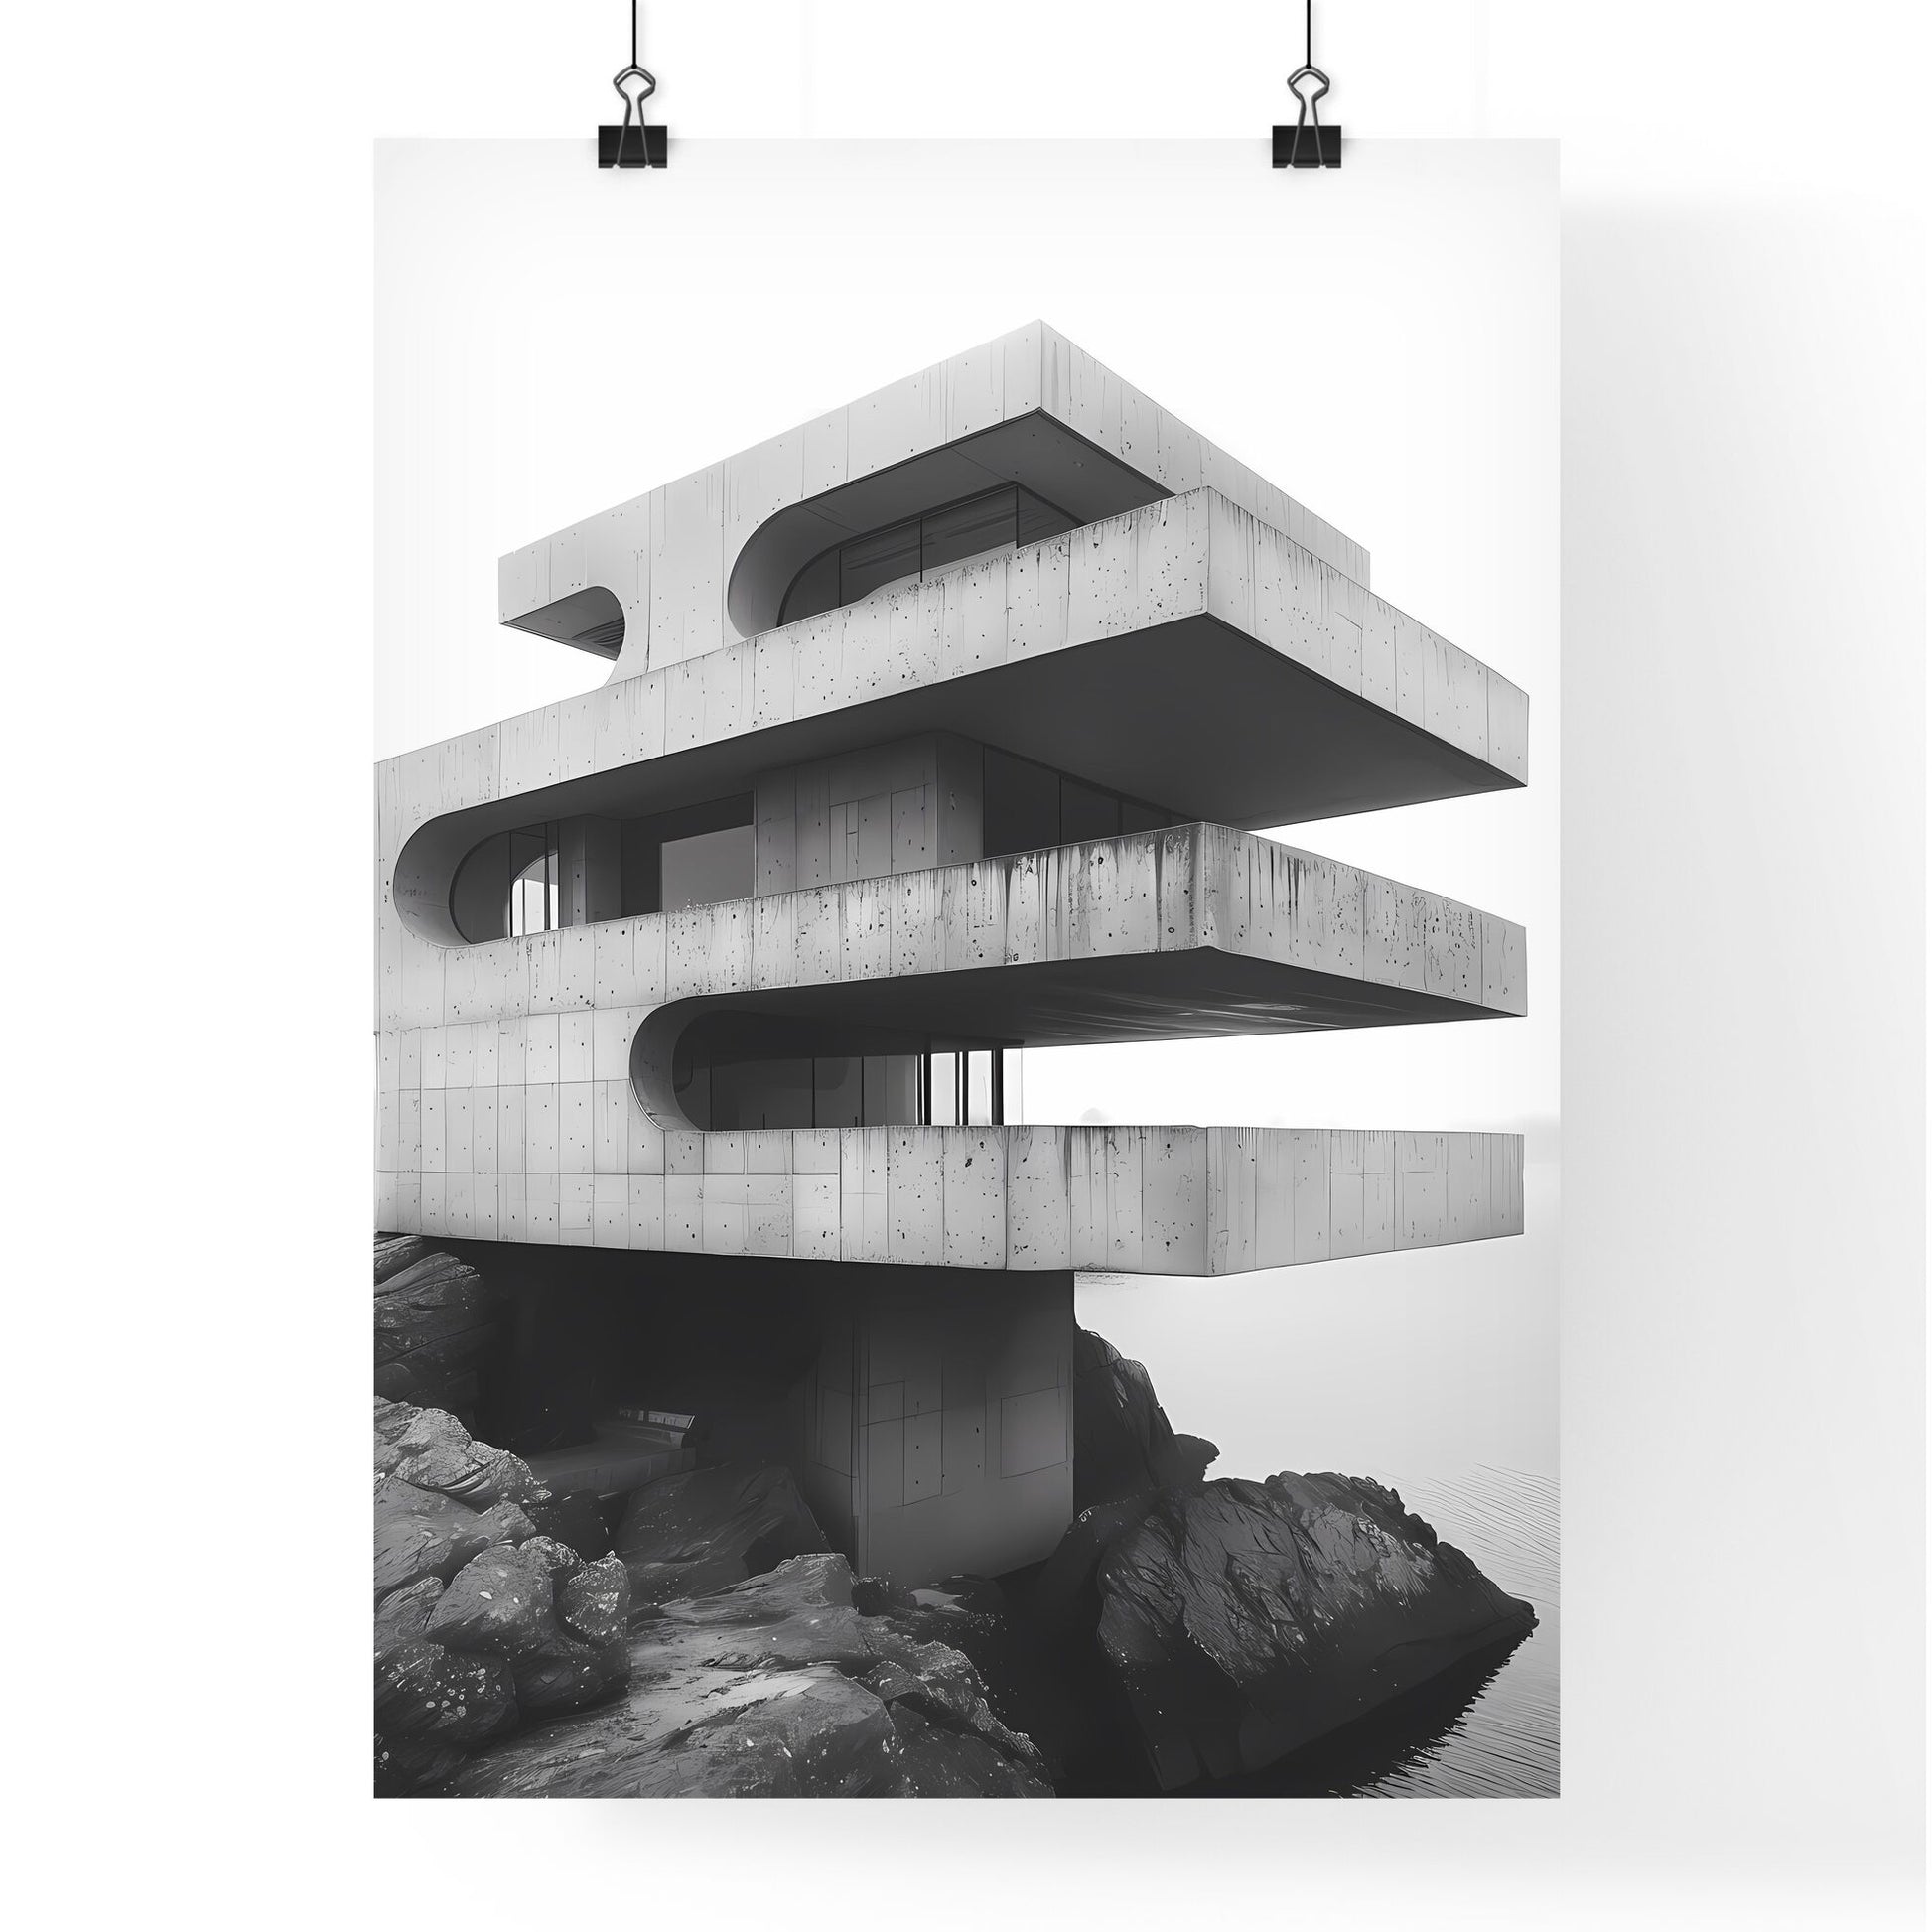 Artistic depiction of a grand high-end architecture with black and white tones on a clean isolated background - a contemporary painting of a house with a sky Default Title